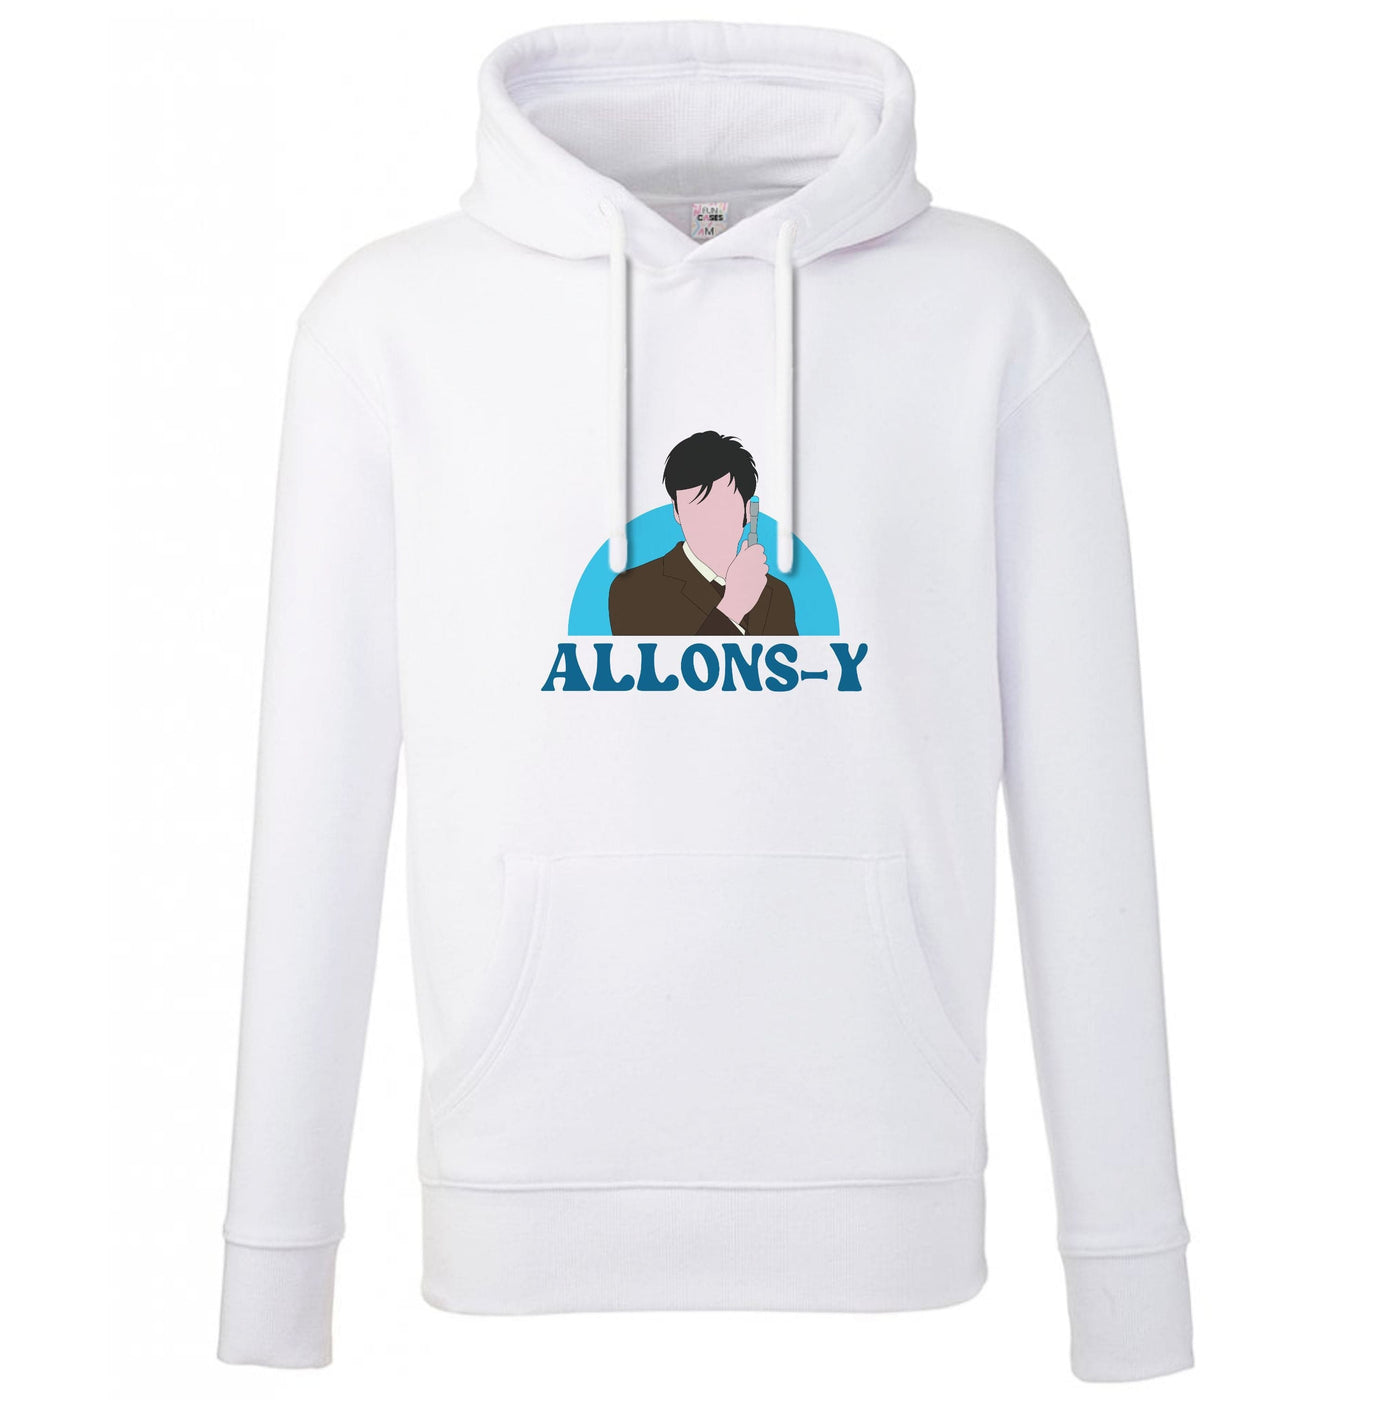 Allons-y - Doctor Who Hoodie